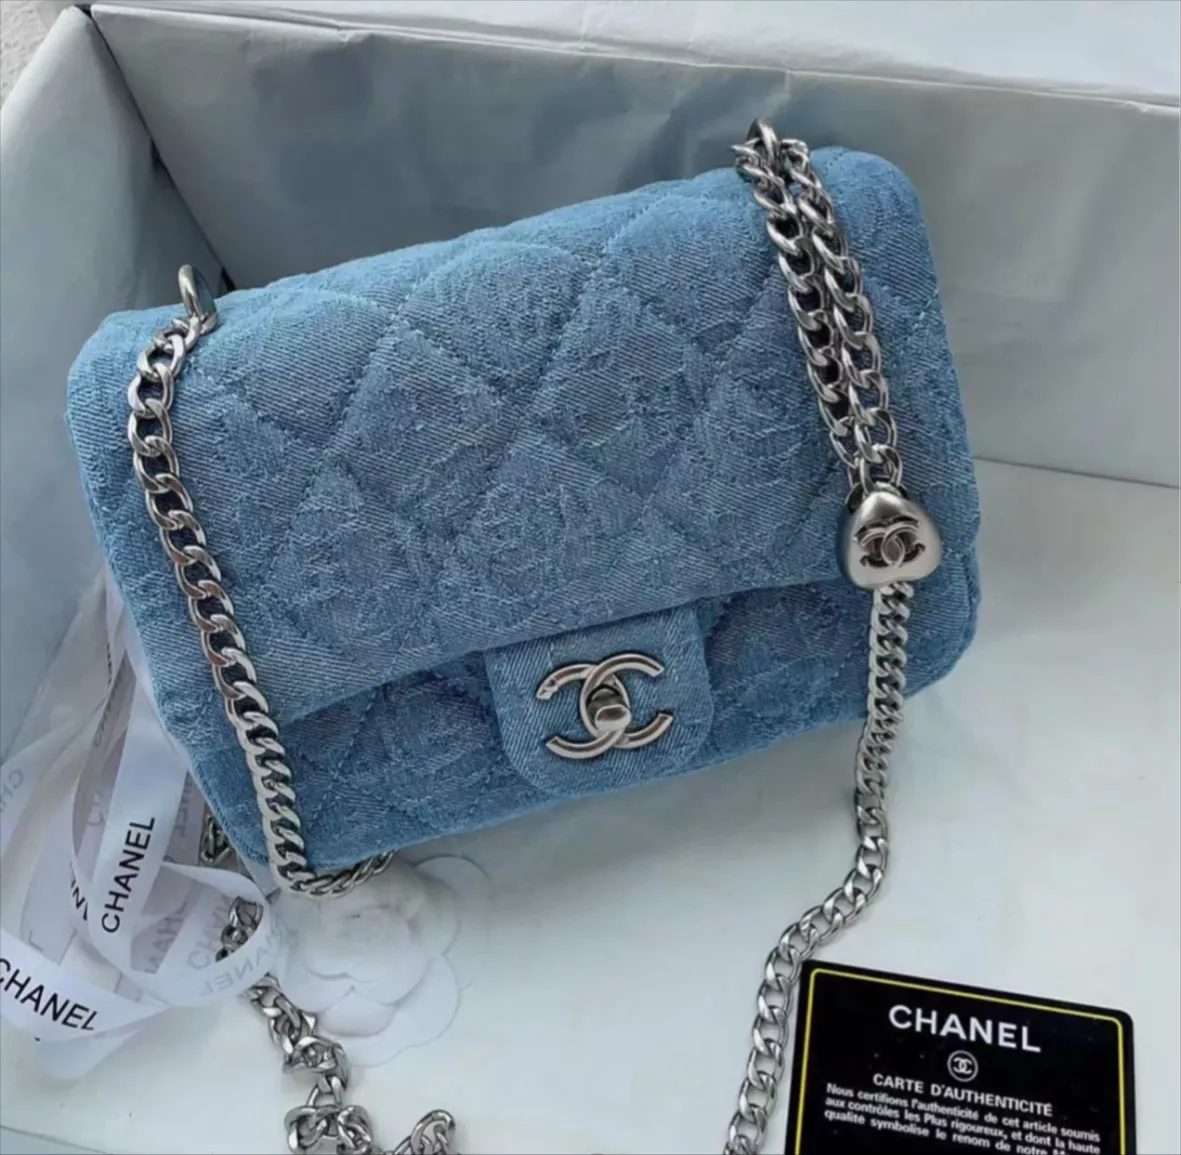 Chanel Classic Flap Bag DUPES #chanel #luxury #bags #fashion